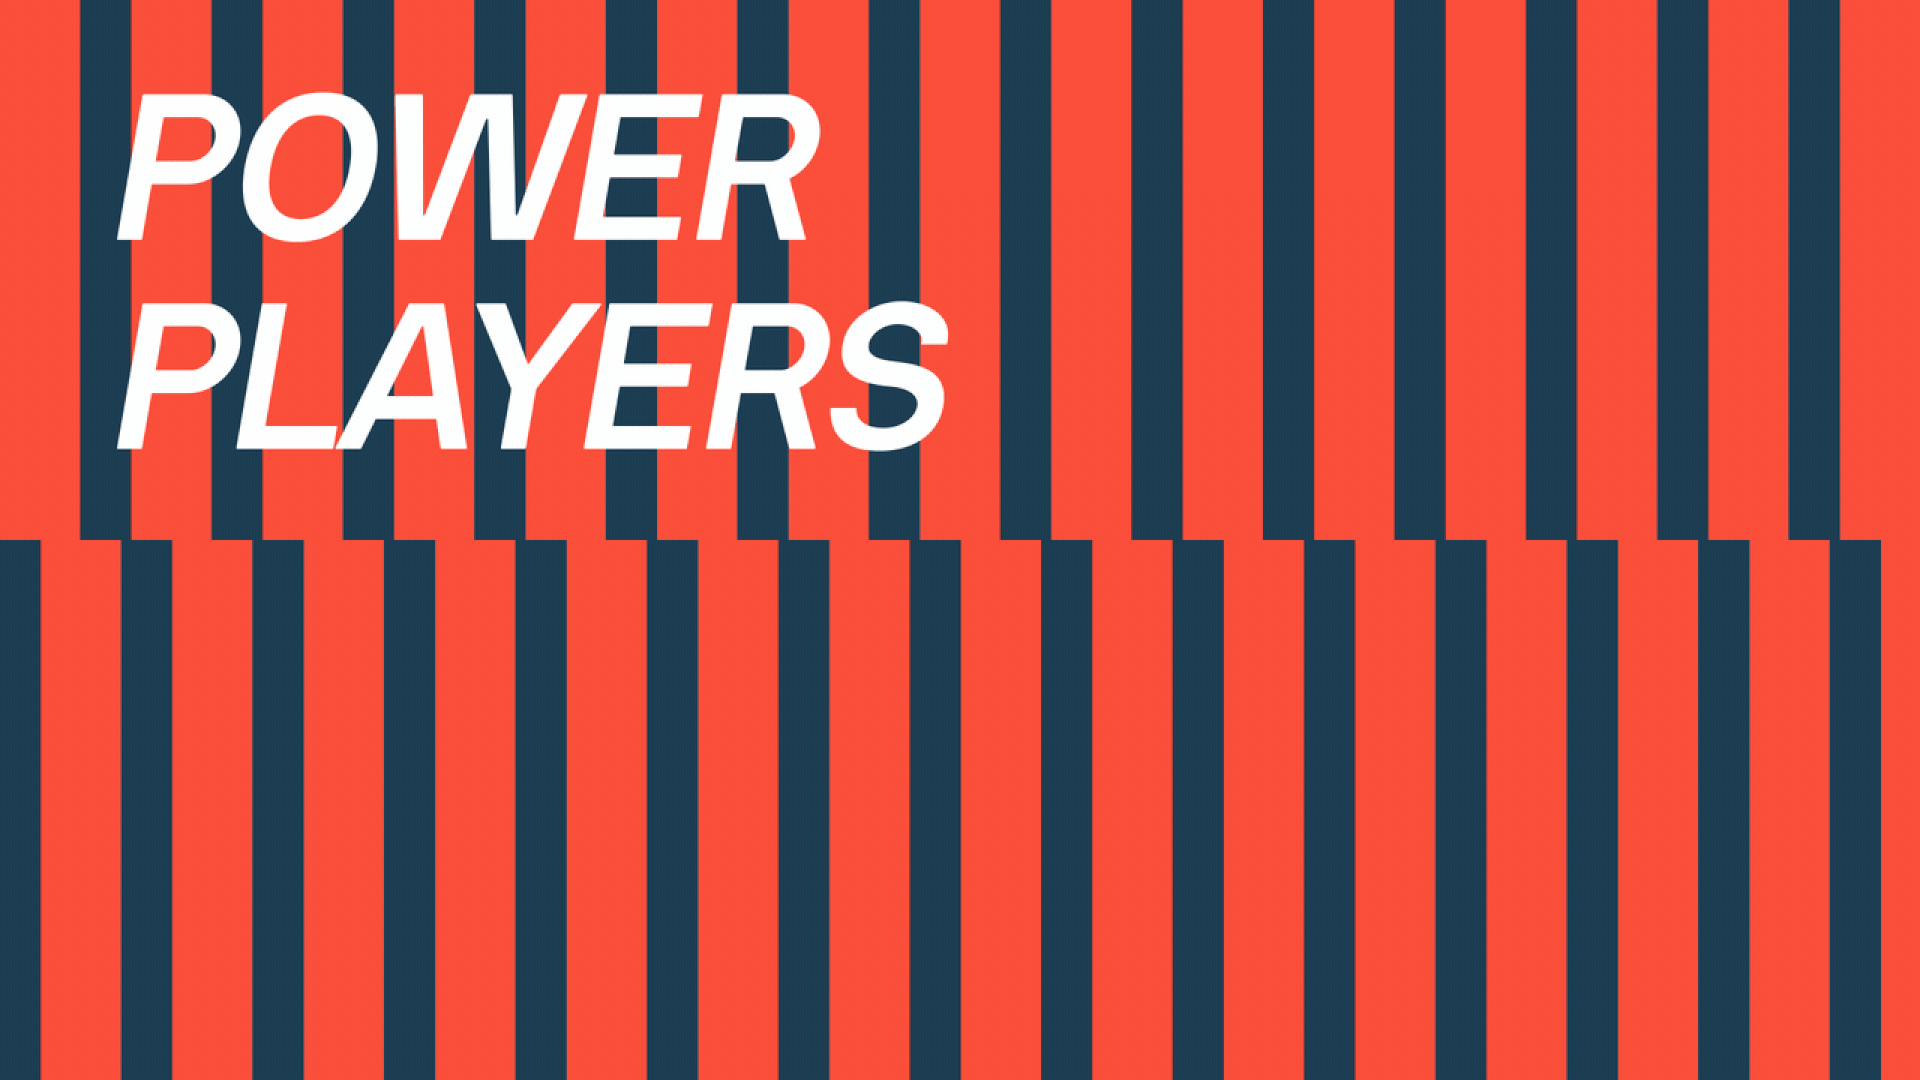 Illustration of two rows of dominos falling with the words Power Players above it.